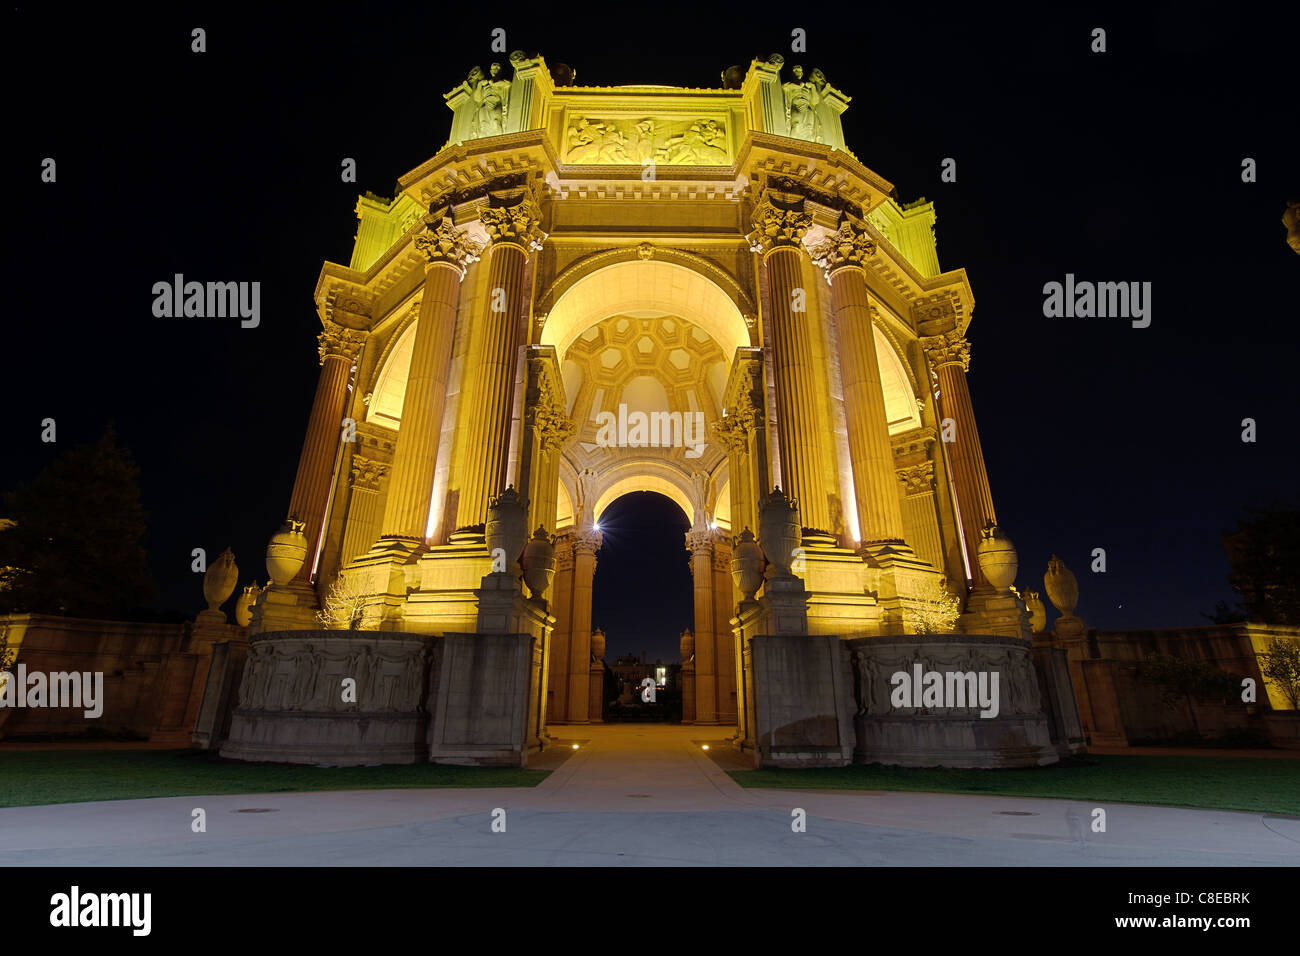 San Francisco Palace of Fine Arts Dome Monument Structure at Night Stock Photo